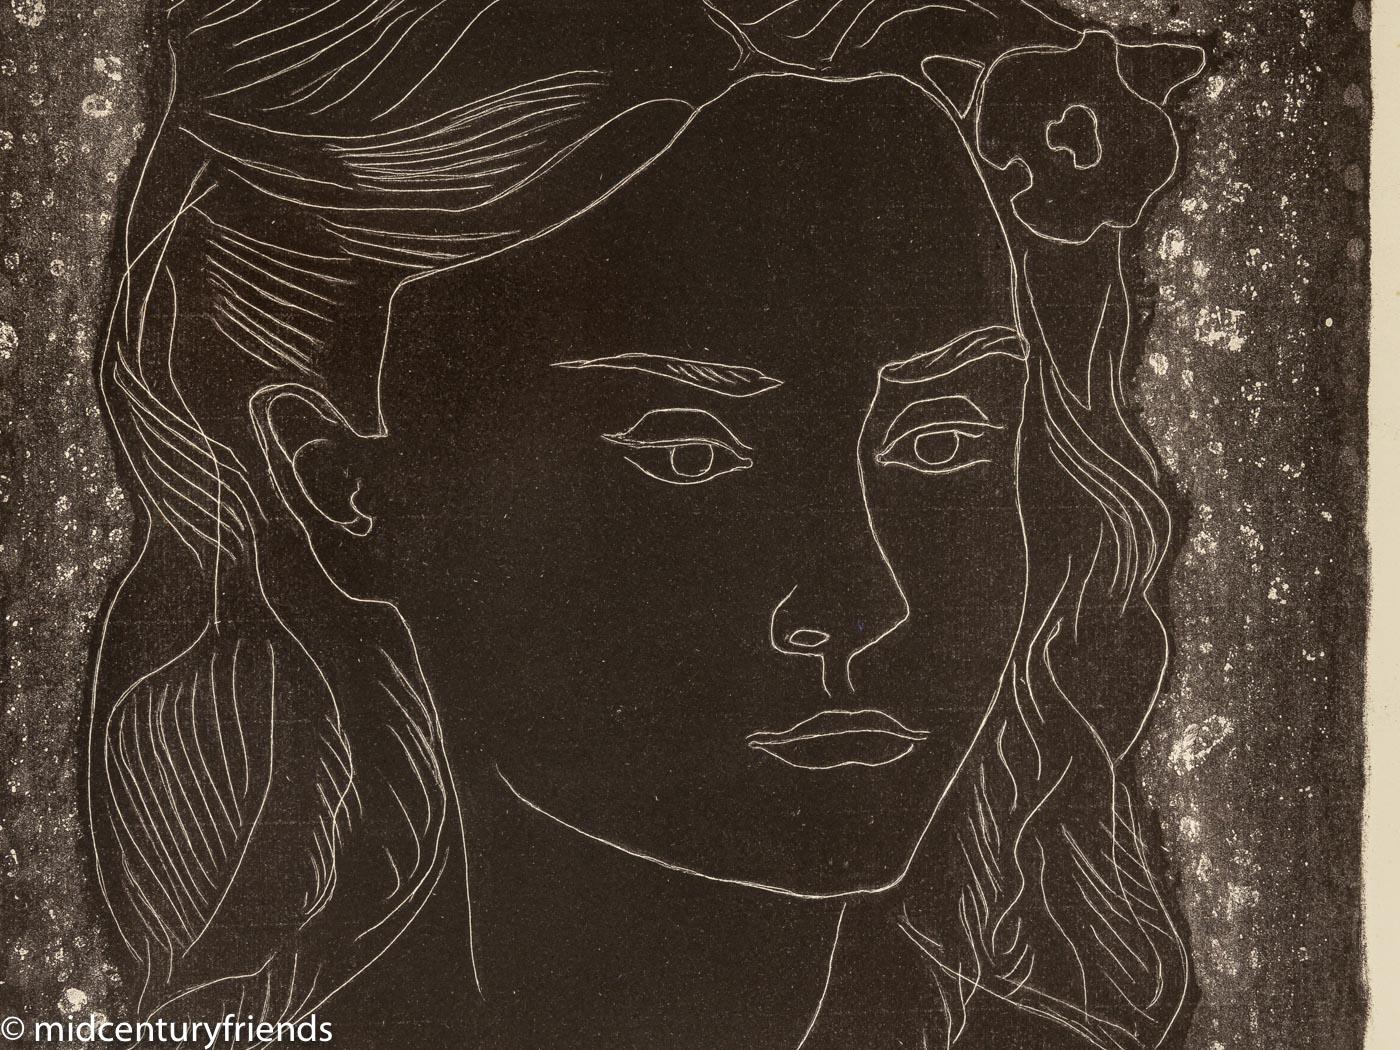 Mid-20th Century Flower Girl by Fritz Kronenberg White Outline on Black Paper 1950s Lithograph For Sale